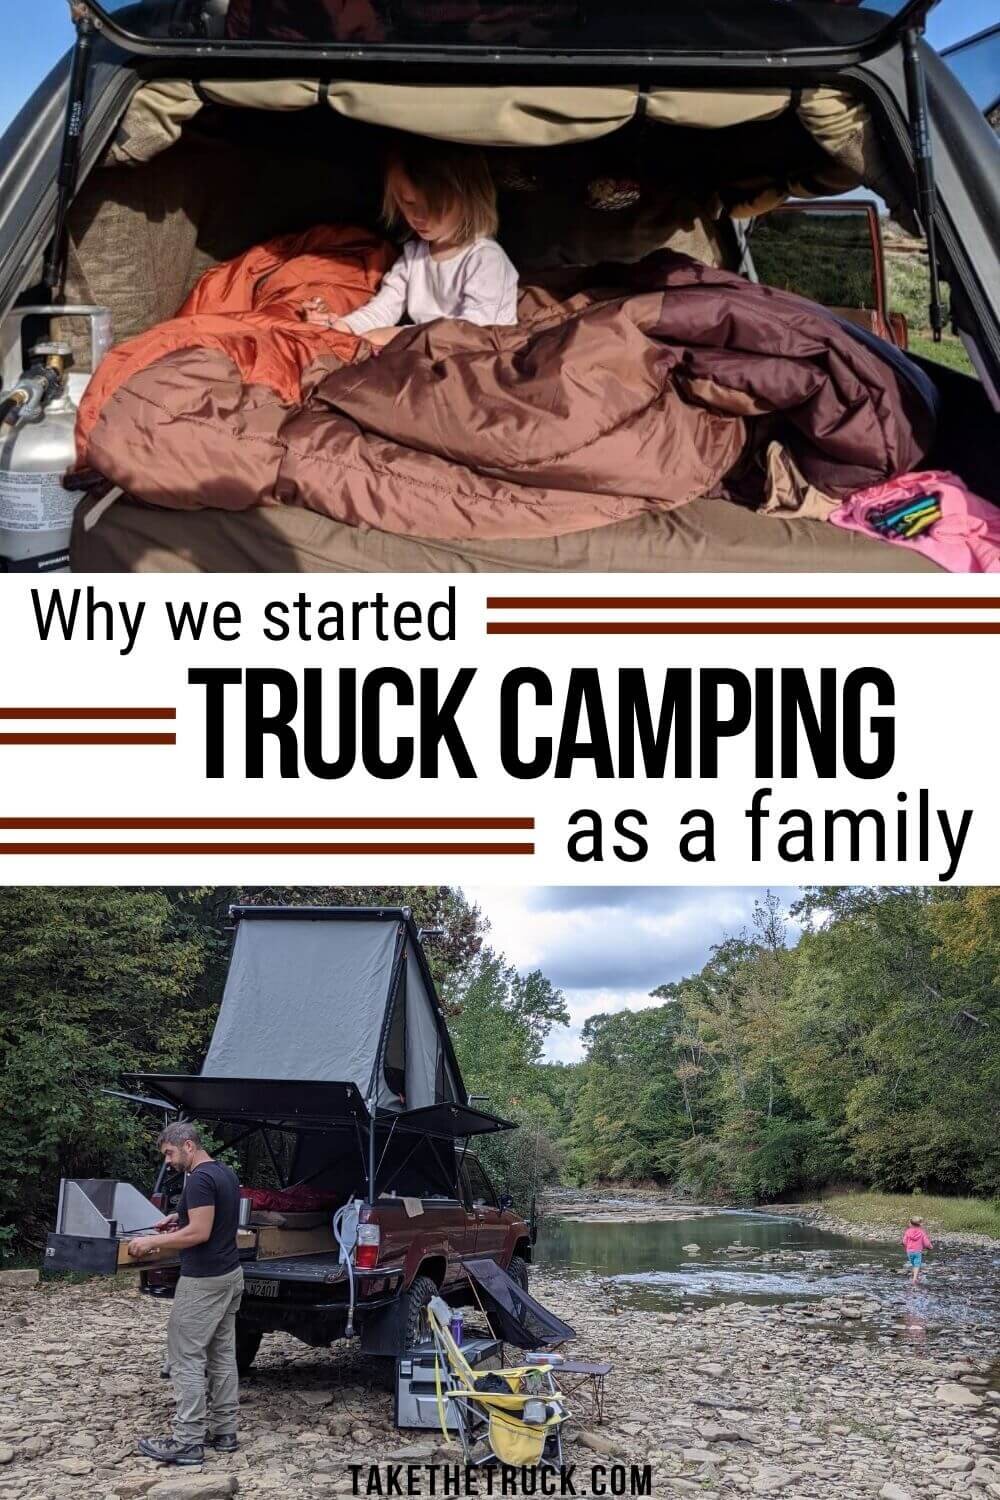 Overlanding with kids and truck bed camping as a family is a great way to explore together and bond! Read this post to hear this overlanding family’s transition from RVing to truck camping.